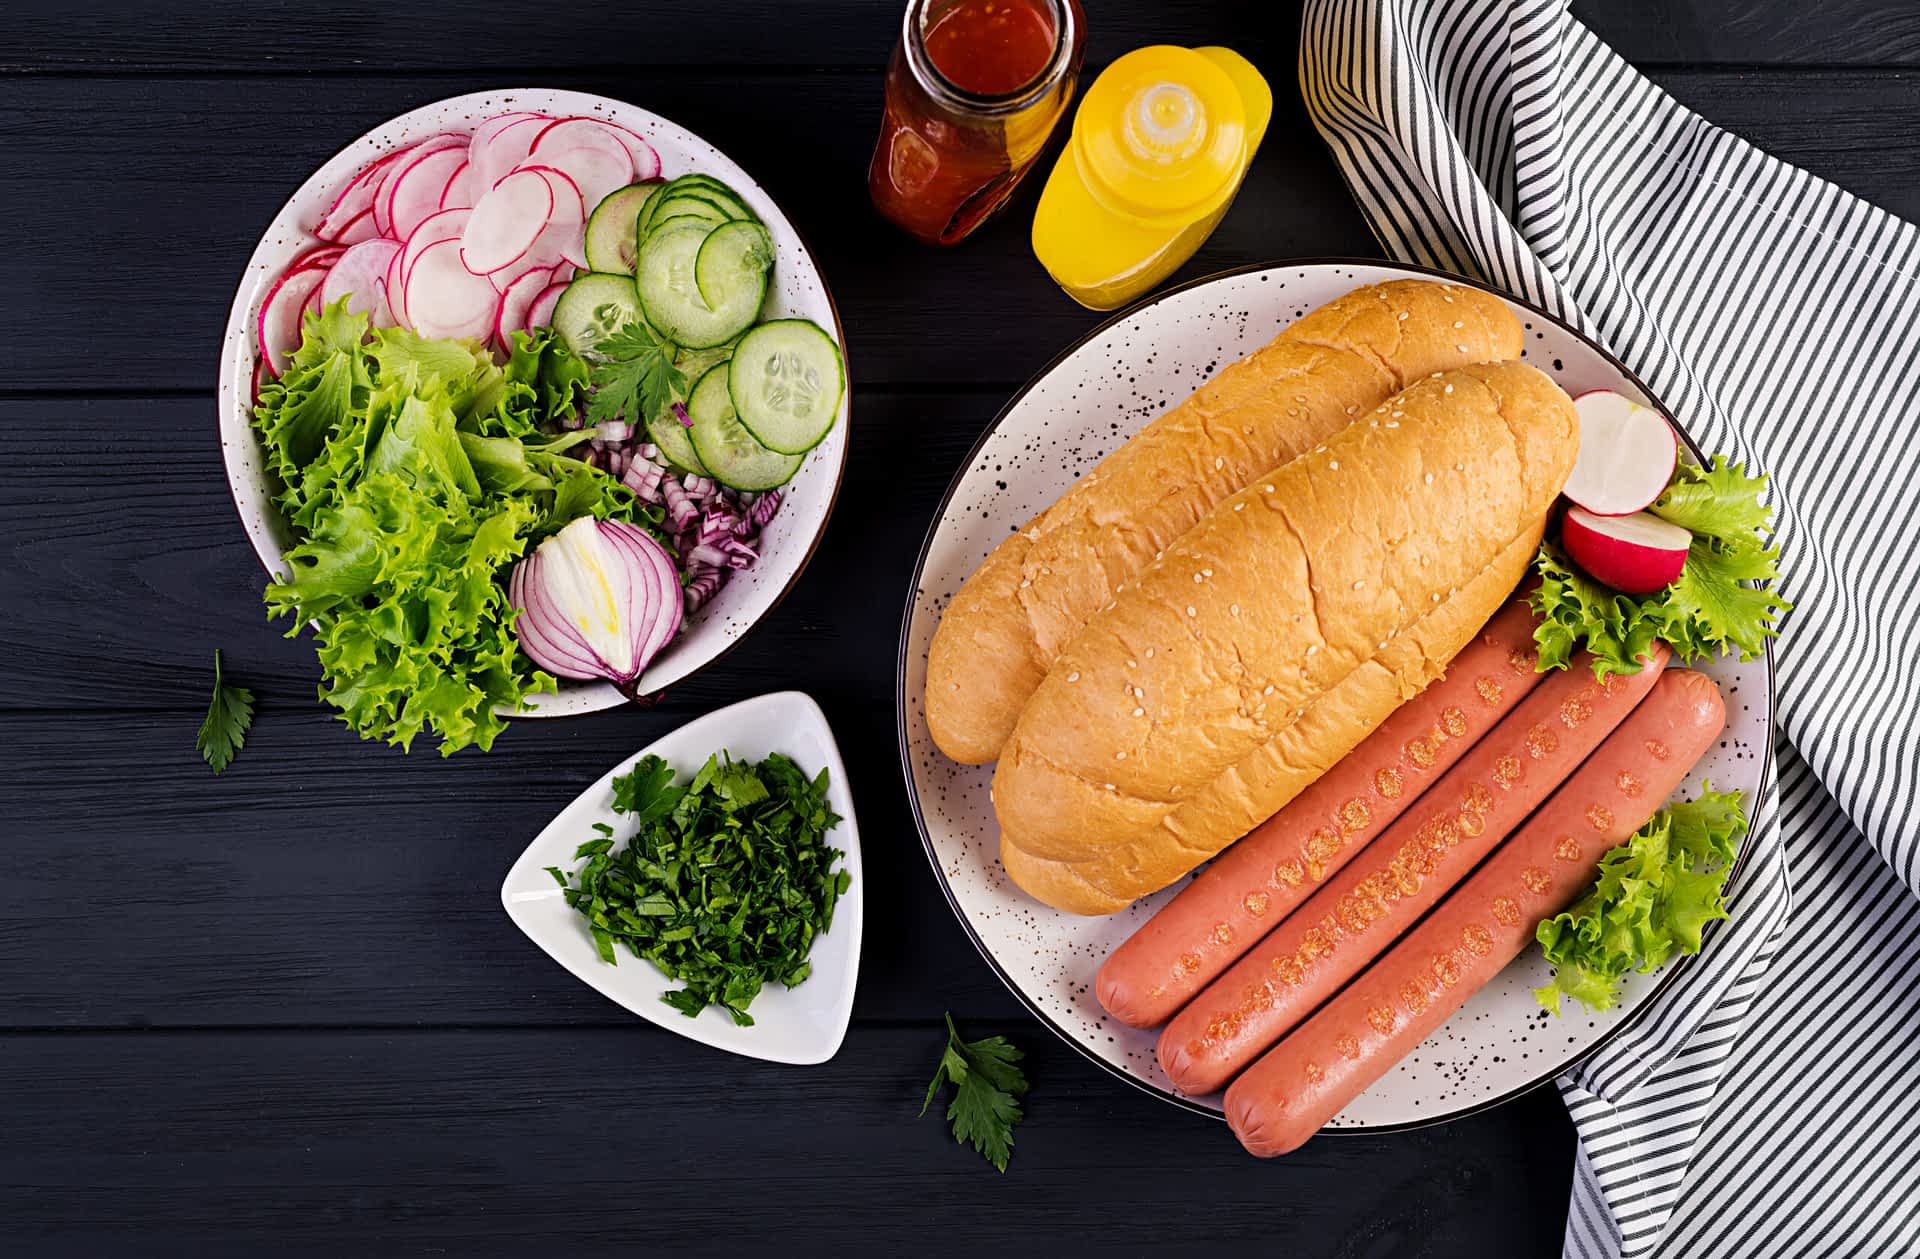 Ingredients for hot dog with  sausage, cucumber, radish and lettuce on dark wooden background. Summer hotdog. Top view